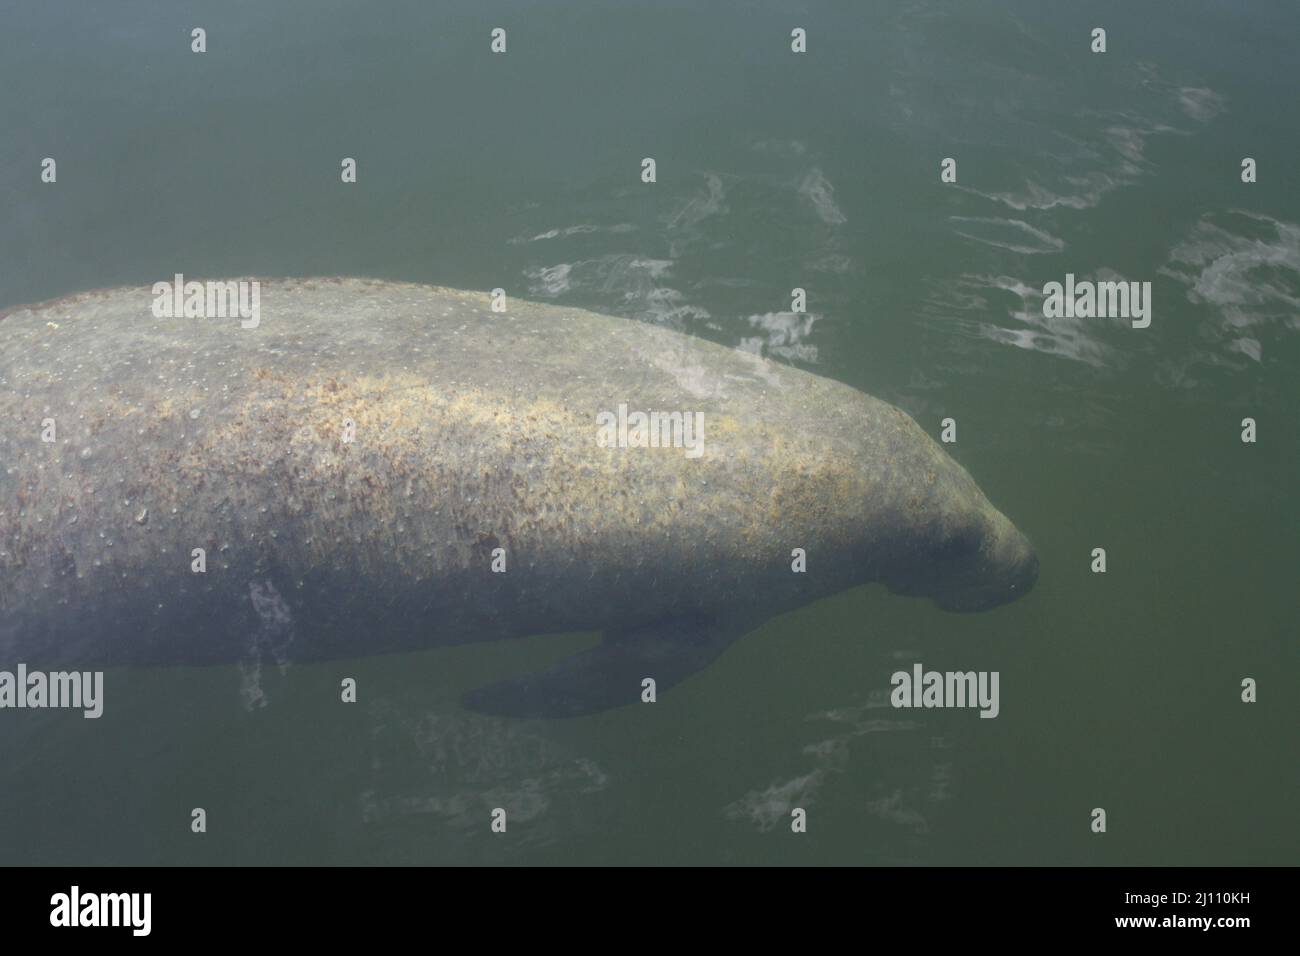 Manatee in the water of the Florida Keys Stock Photo